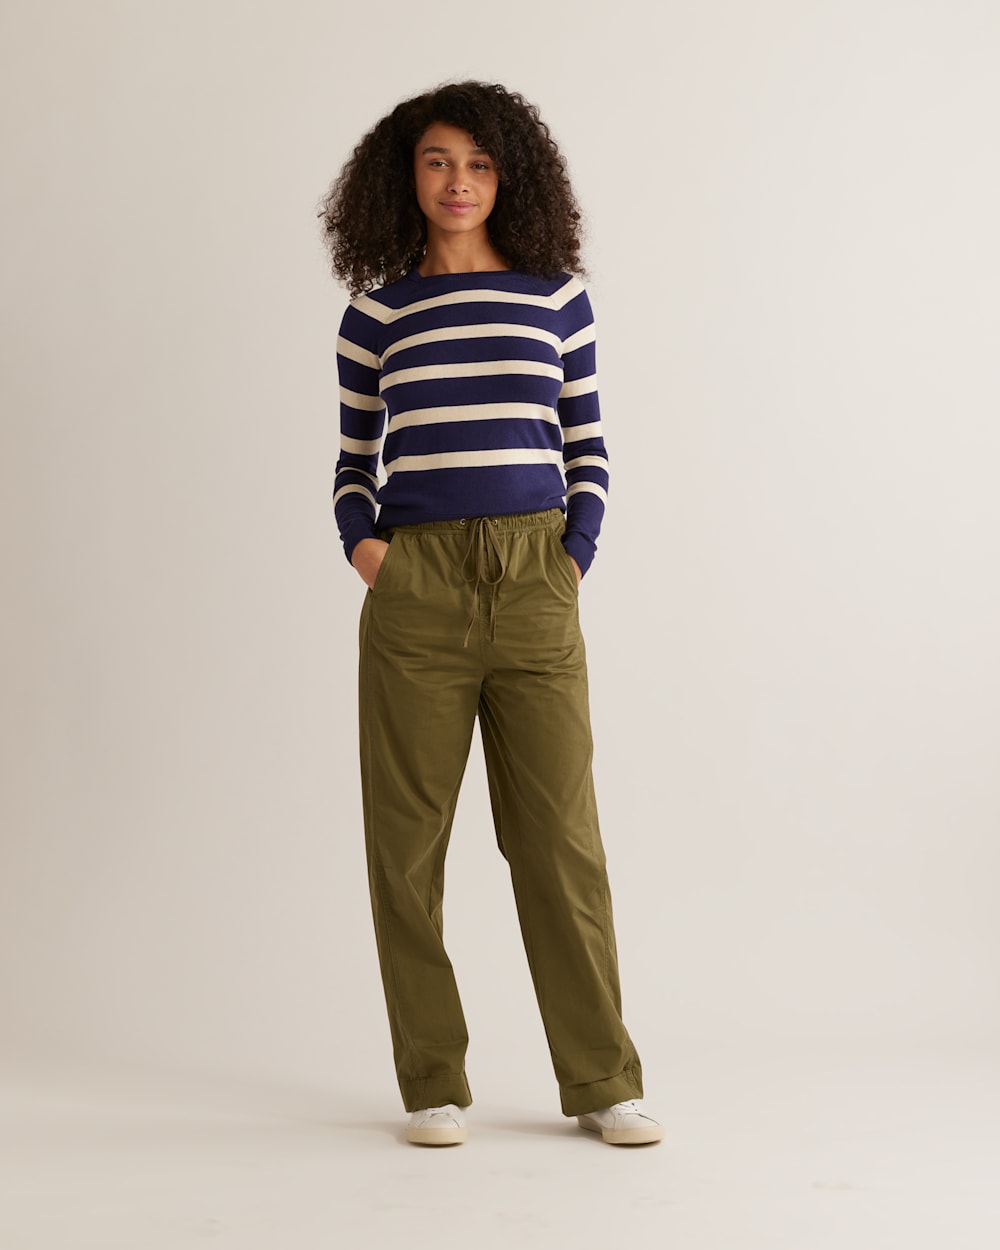 WOMEN'S COTTON/CASHMERE STRIPED PULLOVER IN NAVY/CREAM image number 1